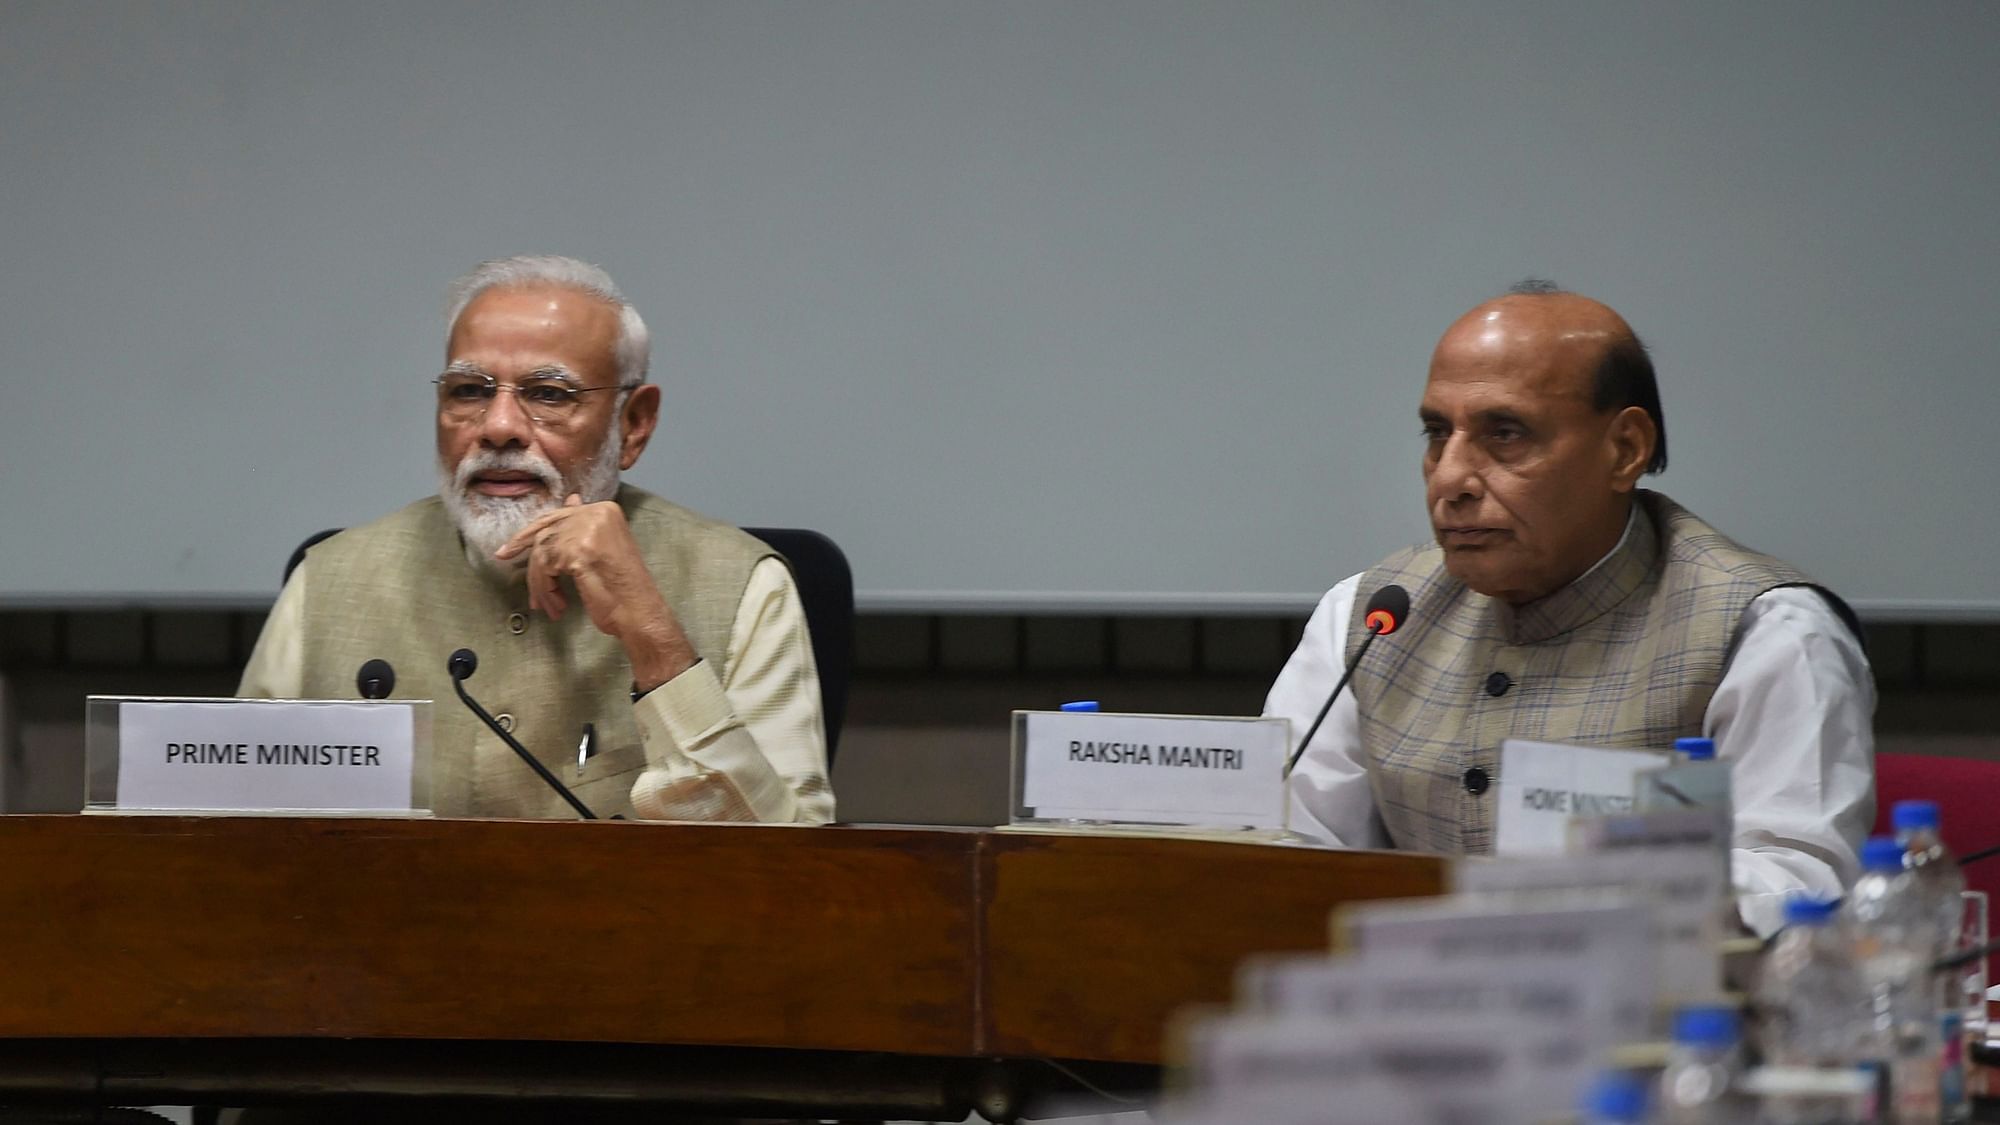 PM Modi and Rajnath Singh at all-party meet on Wednesday, 19 June.